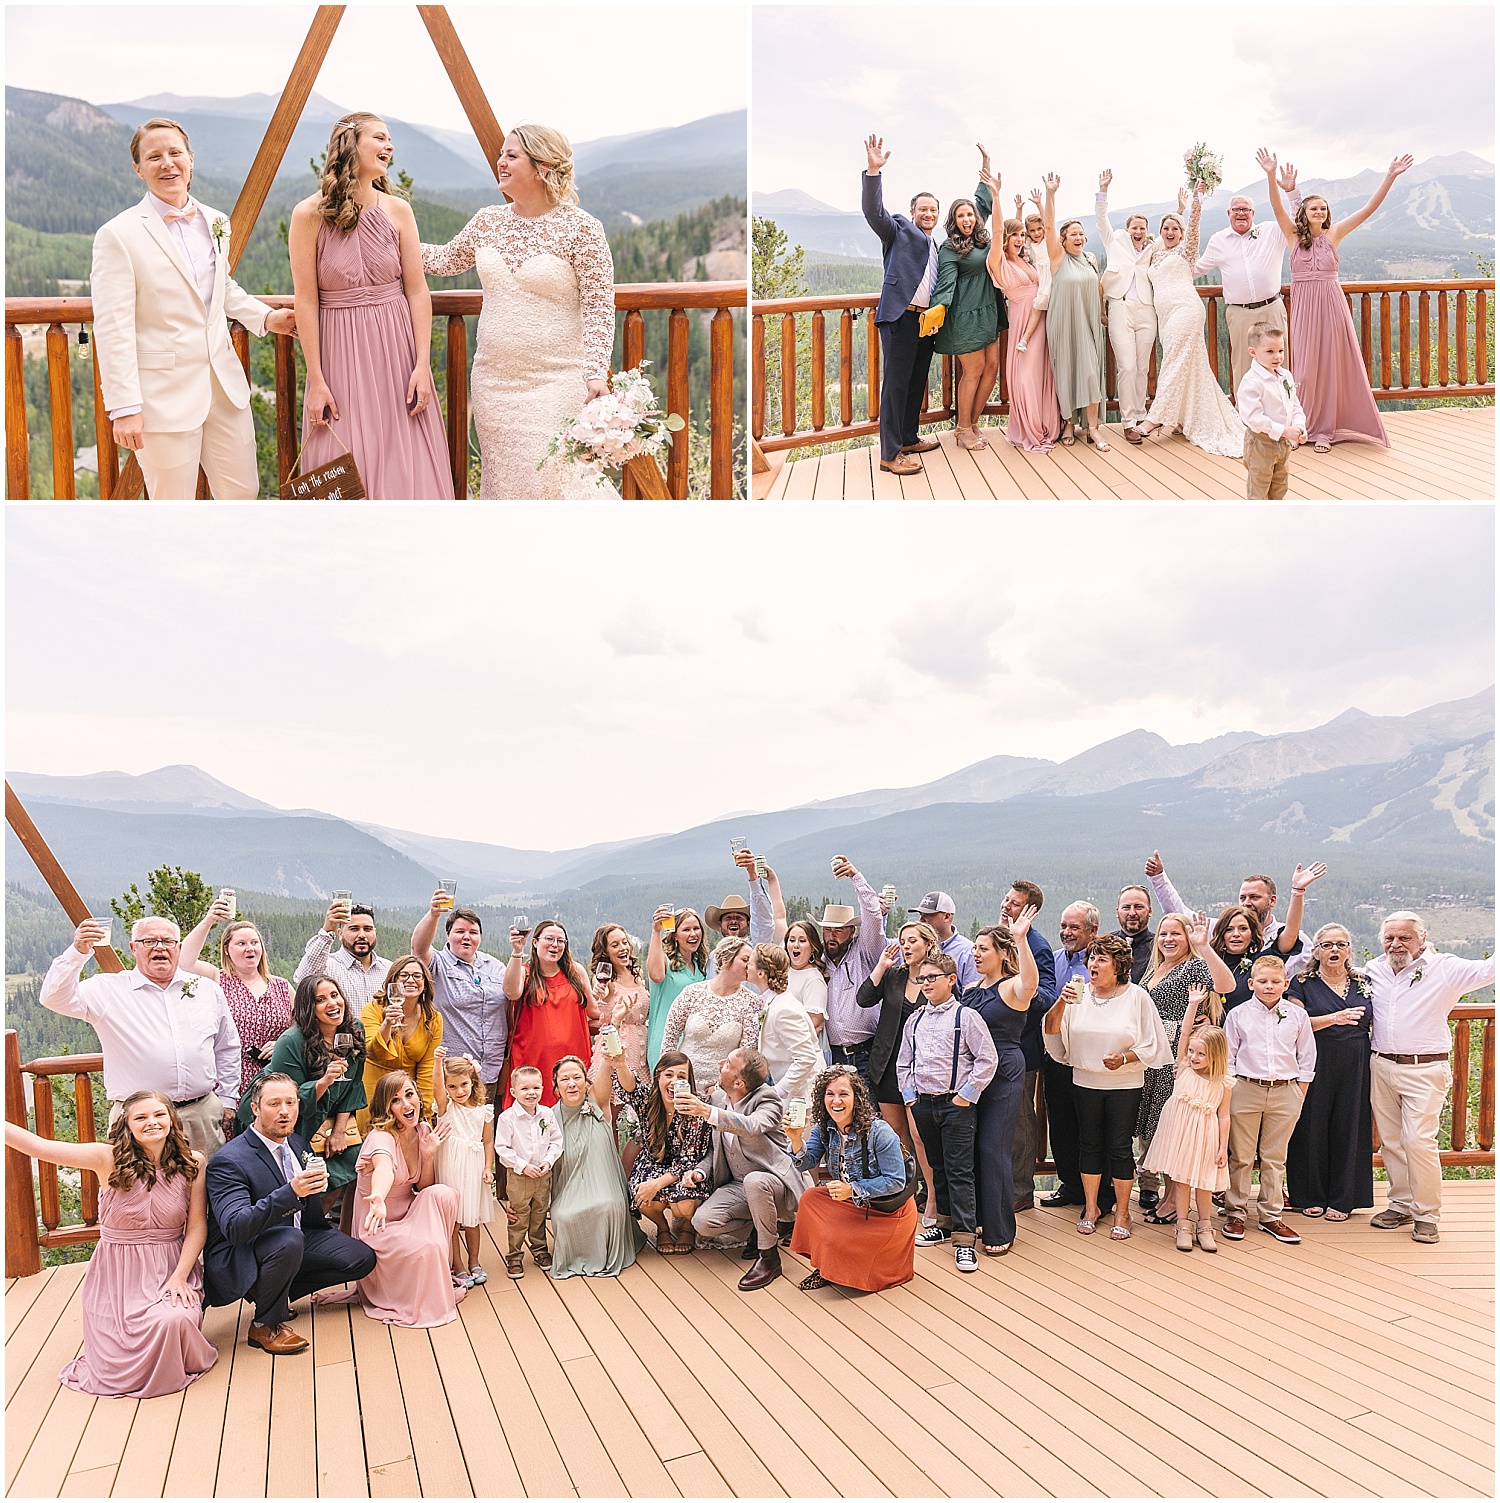 Fun big group photos with the guests of wedding at the Lodge at Breckenridge